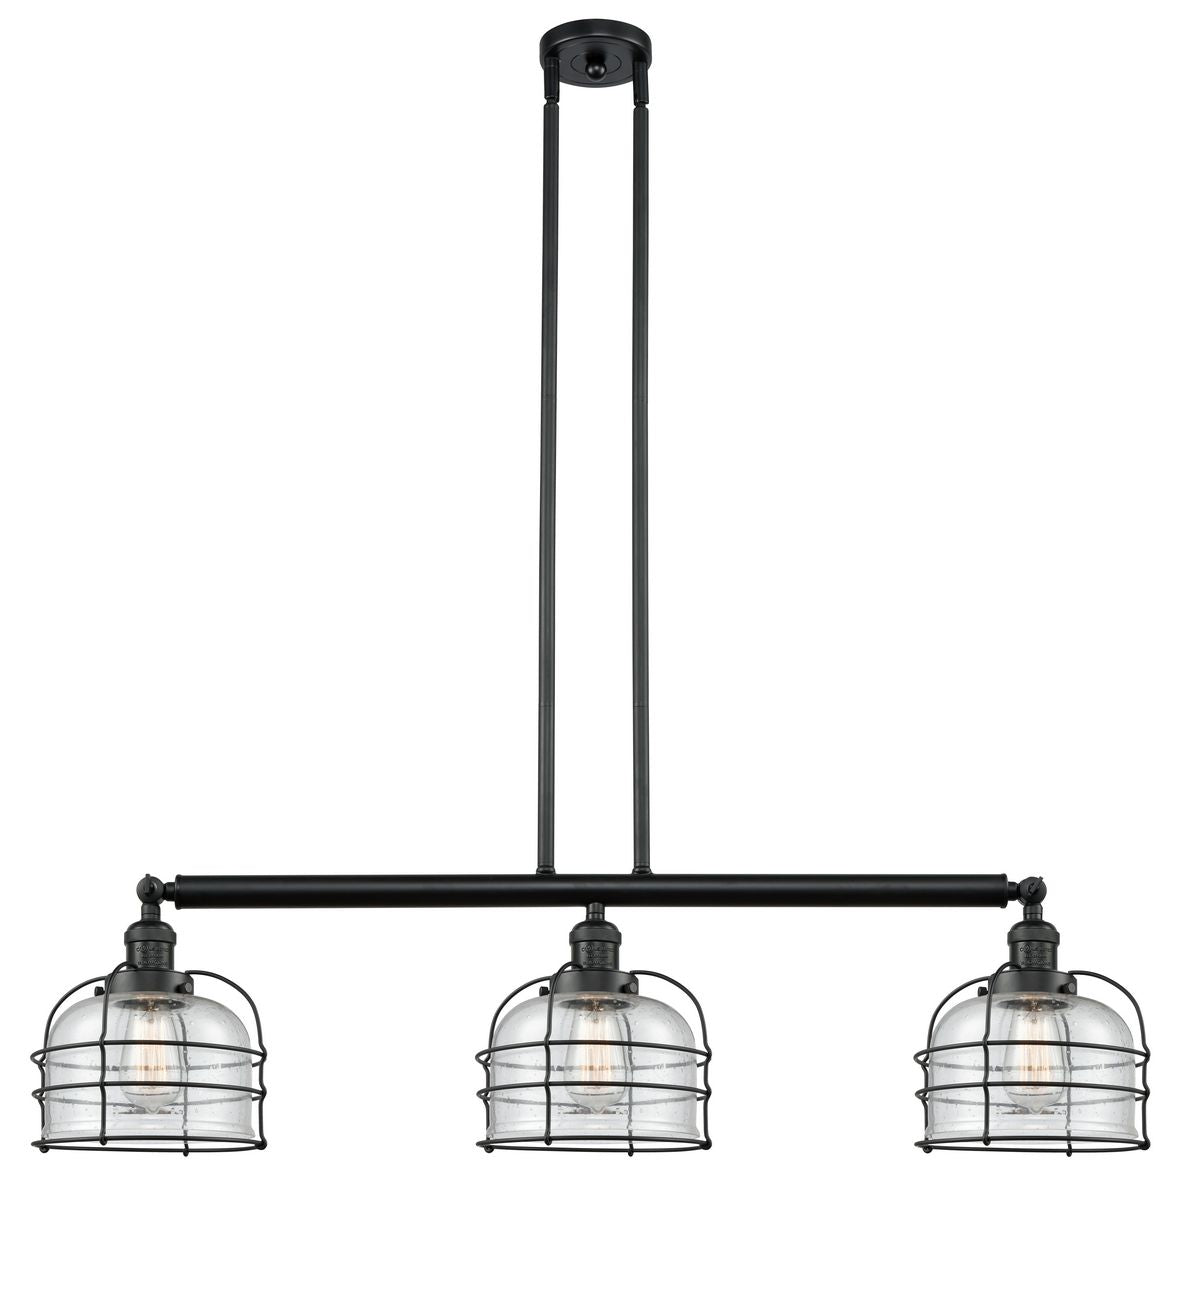 213-BK-G74-CE 3-Light 41.5" Matte Black Island Light - Seedy Large Bell Cage Glass - LED Bulb - Dimmensions: 41.5 x 9 x 13<br>Minimum Height : 20.5<br>Maximum Height : 44.5 - Sloped Ceiling Compatible: Yes